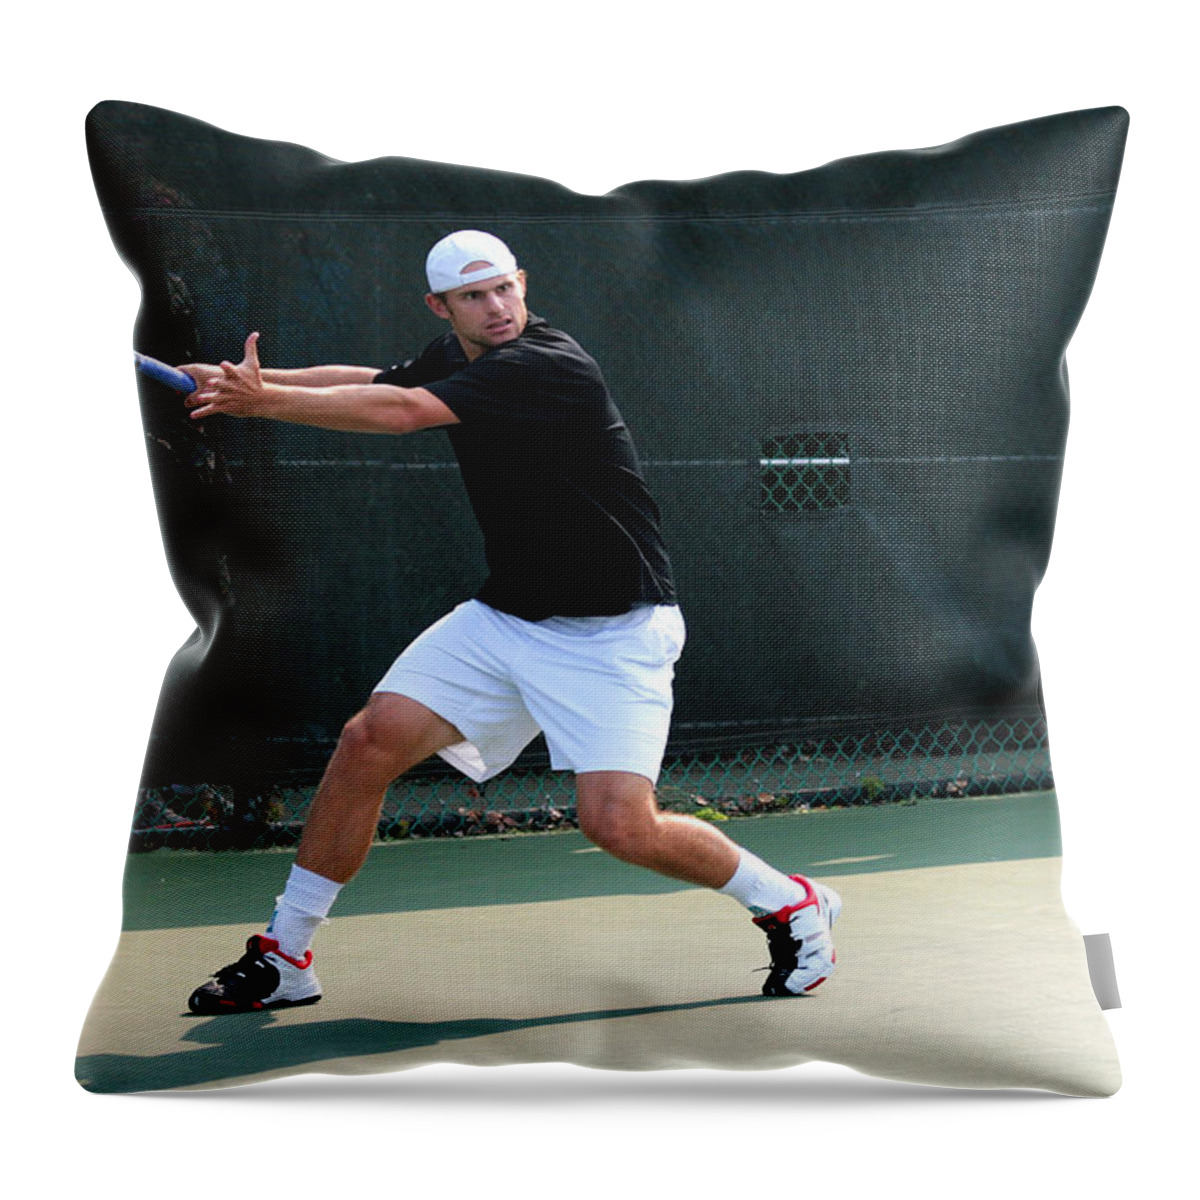 Andy Roddick Throw Pillow featuring the photograph Andy Roddick by James Marvin Phelps